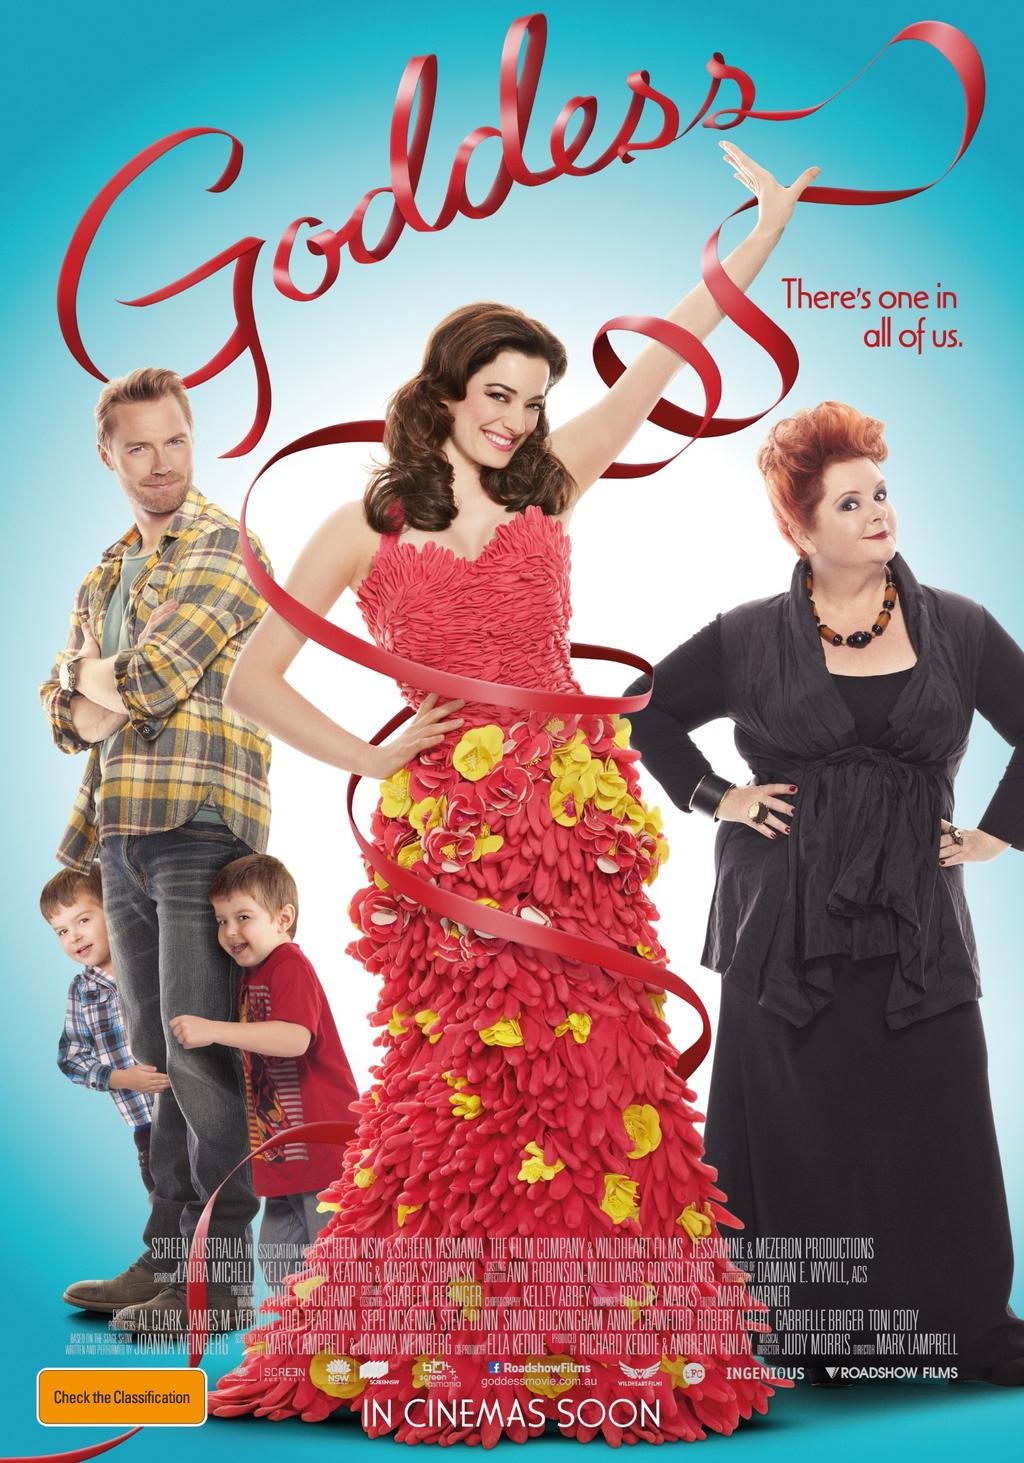 Extra Large Movie Poster Image for Goddess (#1 of 2)